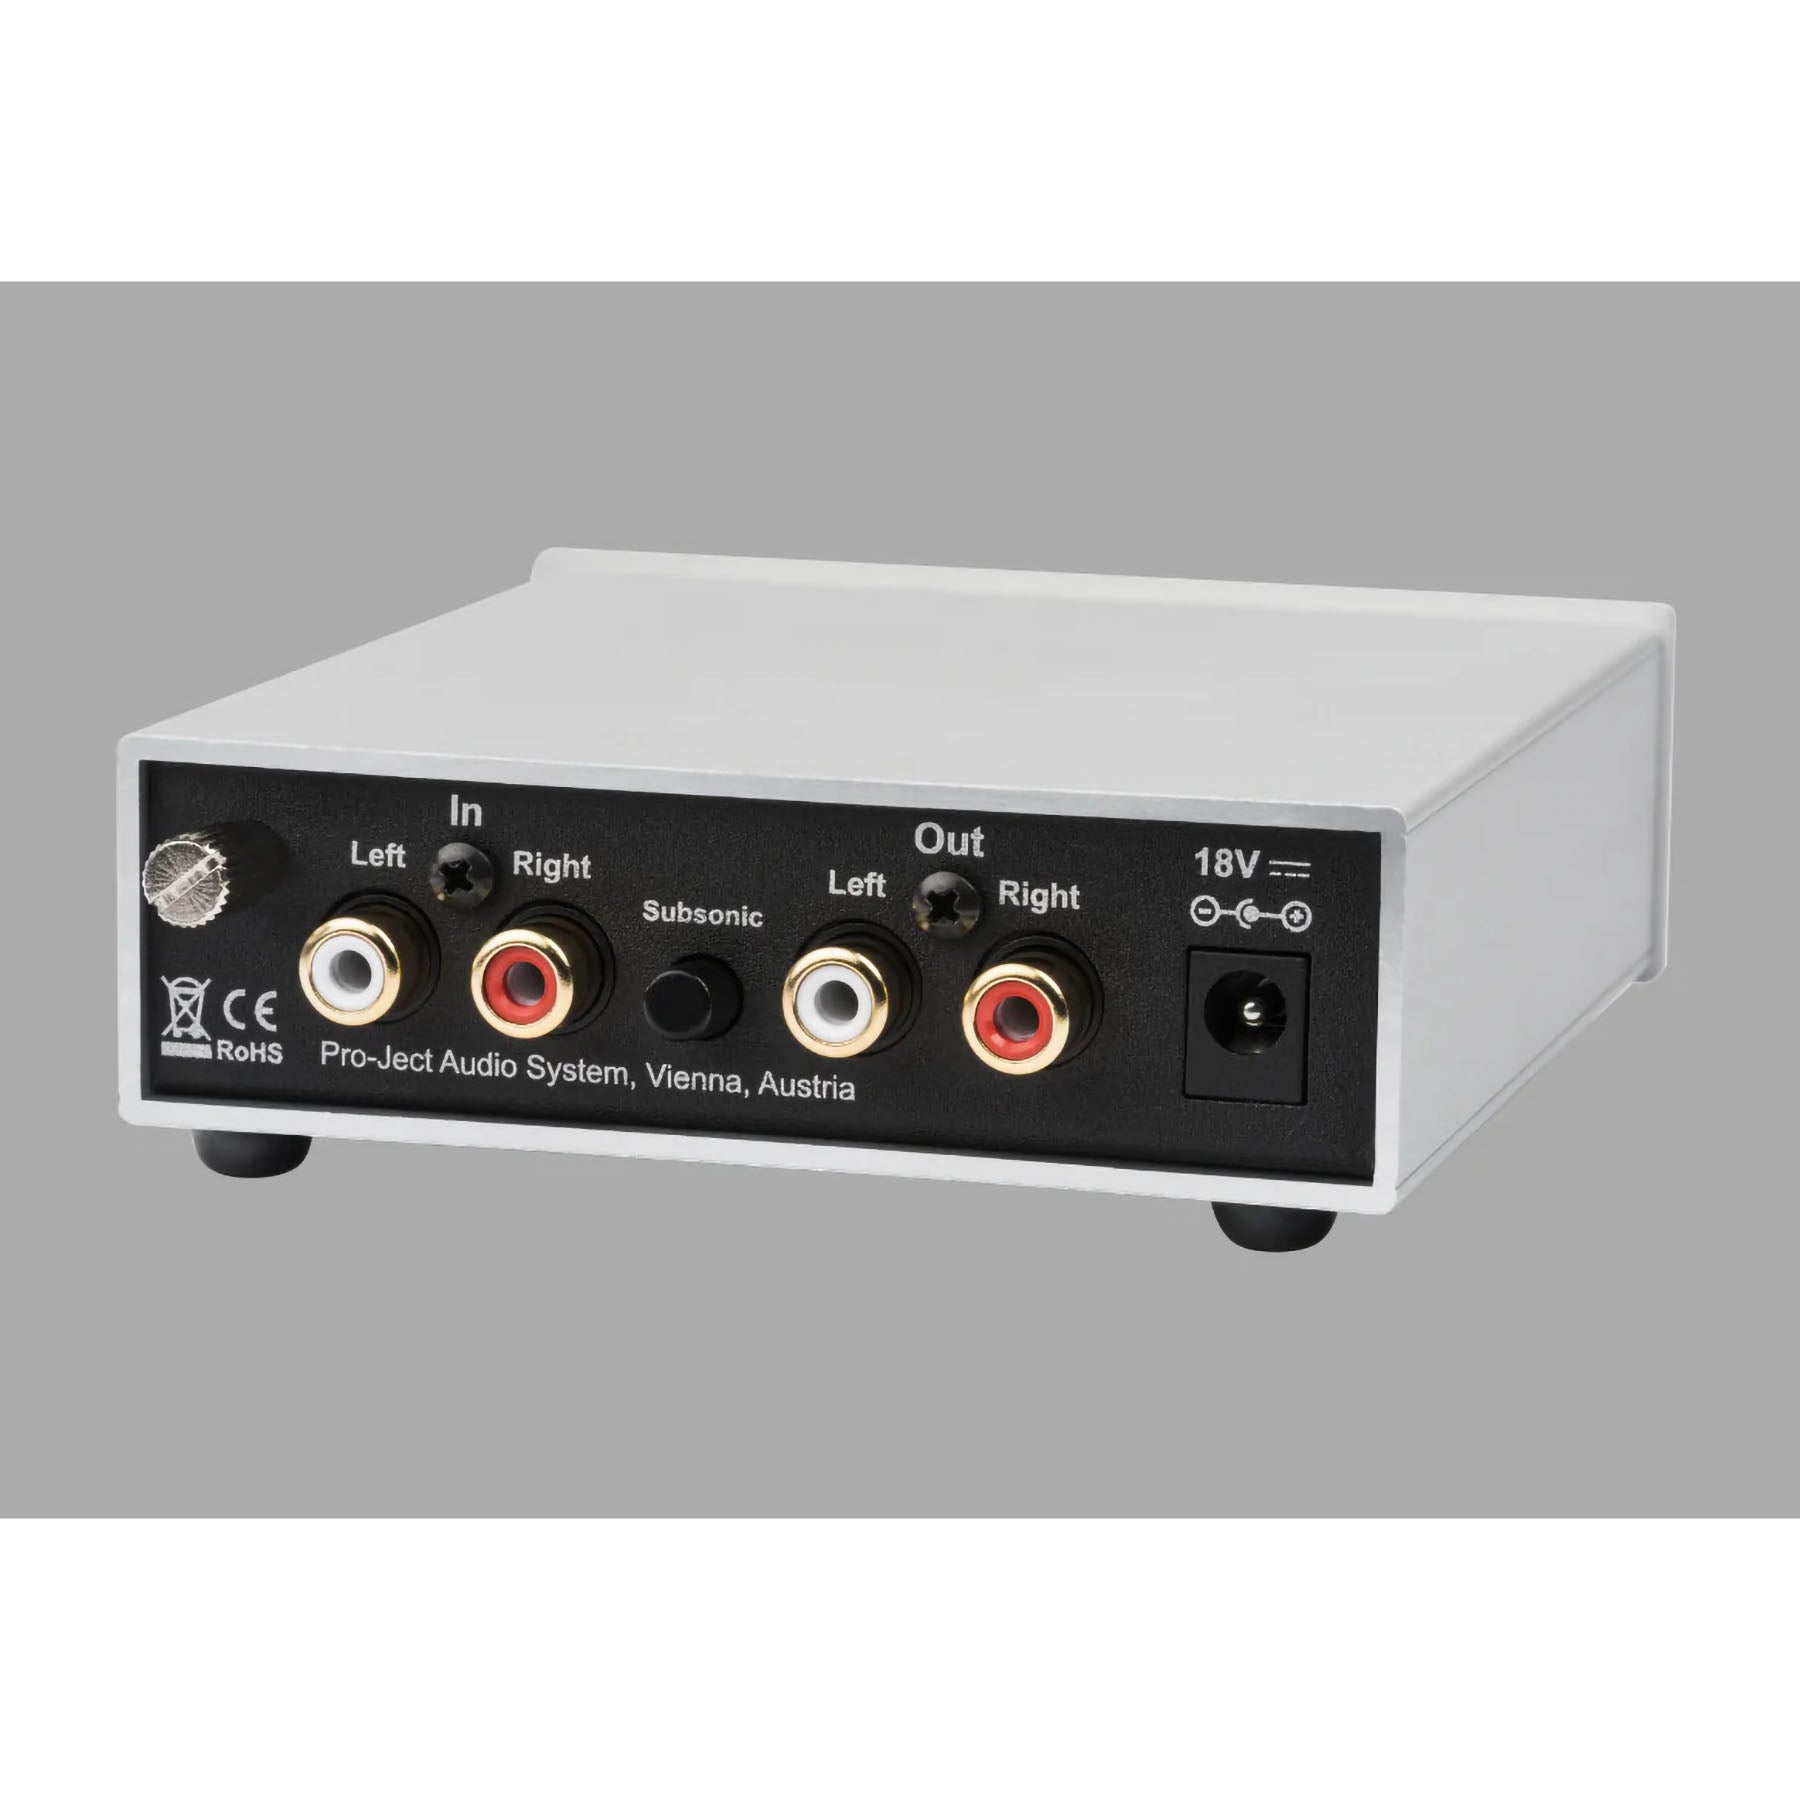 Pro-Ject Stereo Box S2 BT Integrated Amplifier with Bluetooth